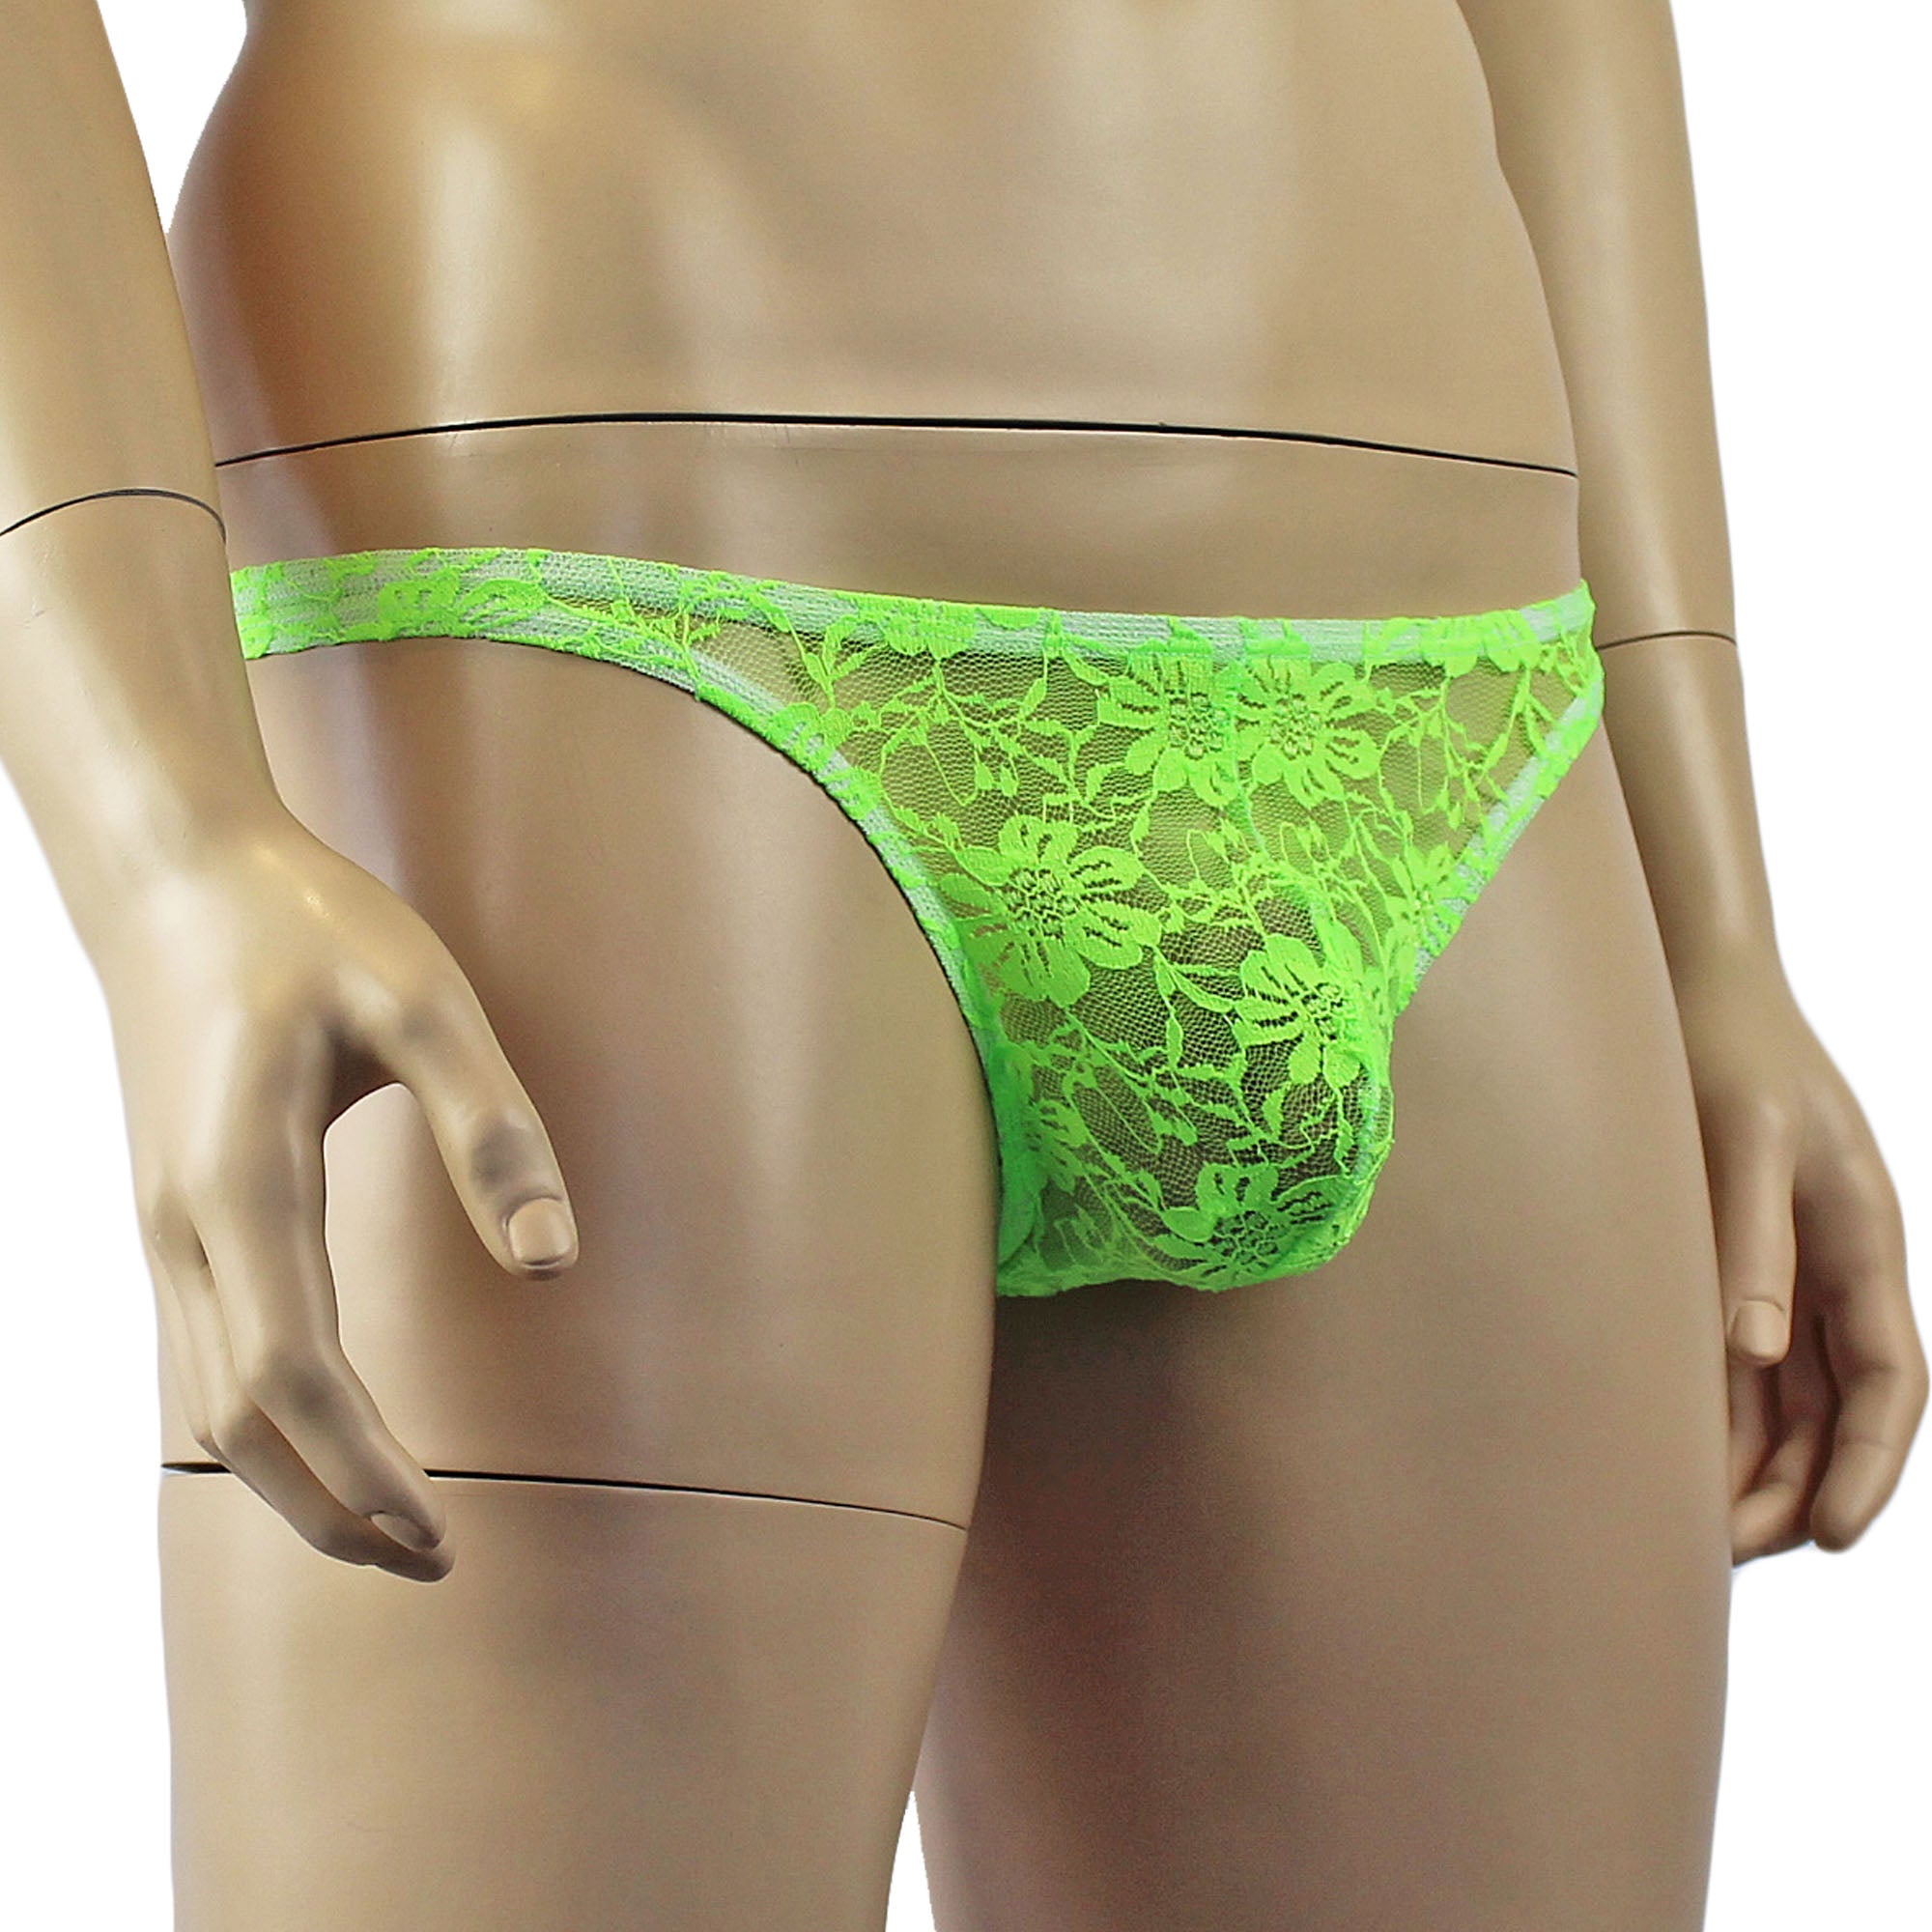 Mens Sexy Lingerie Lace Thong G string Neon Green